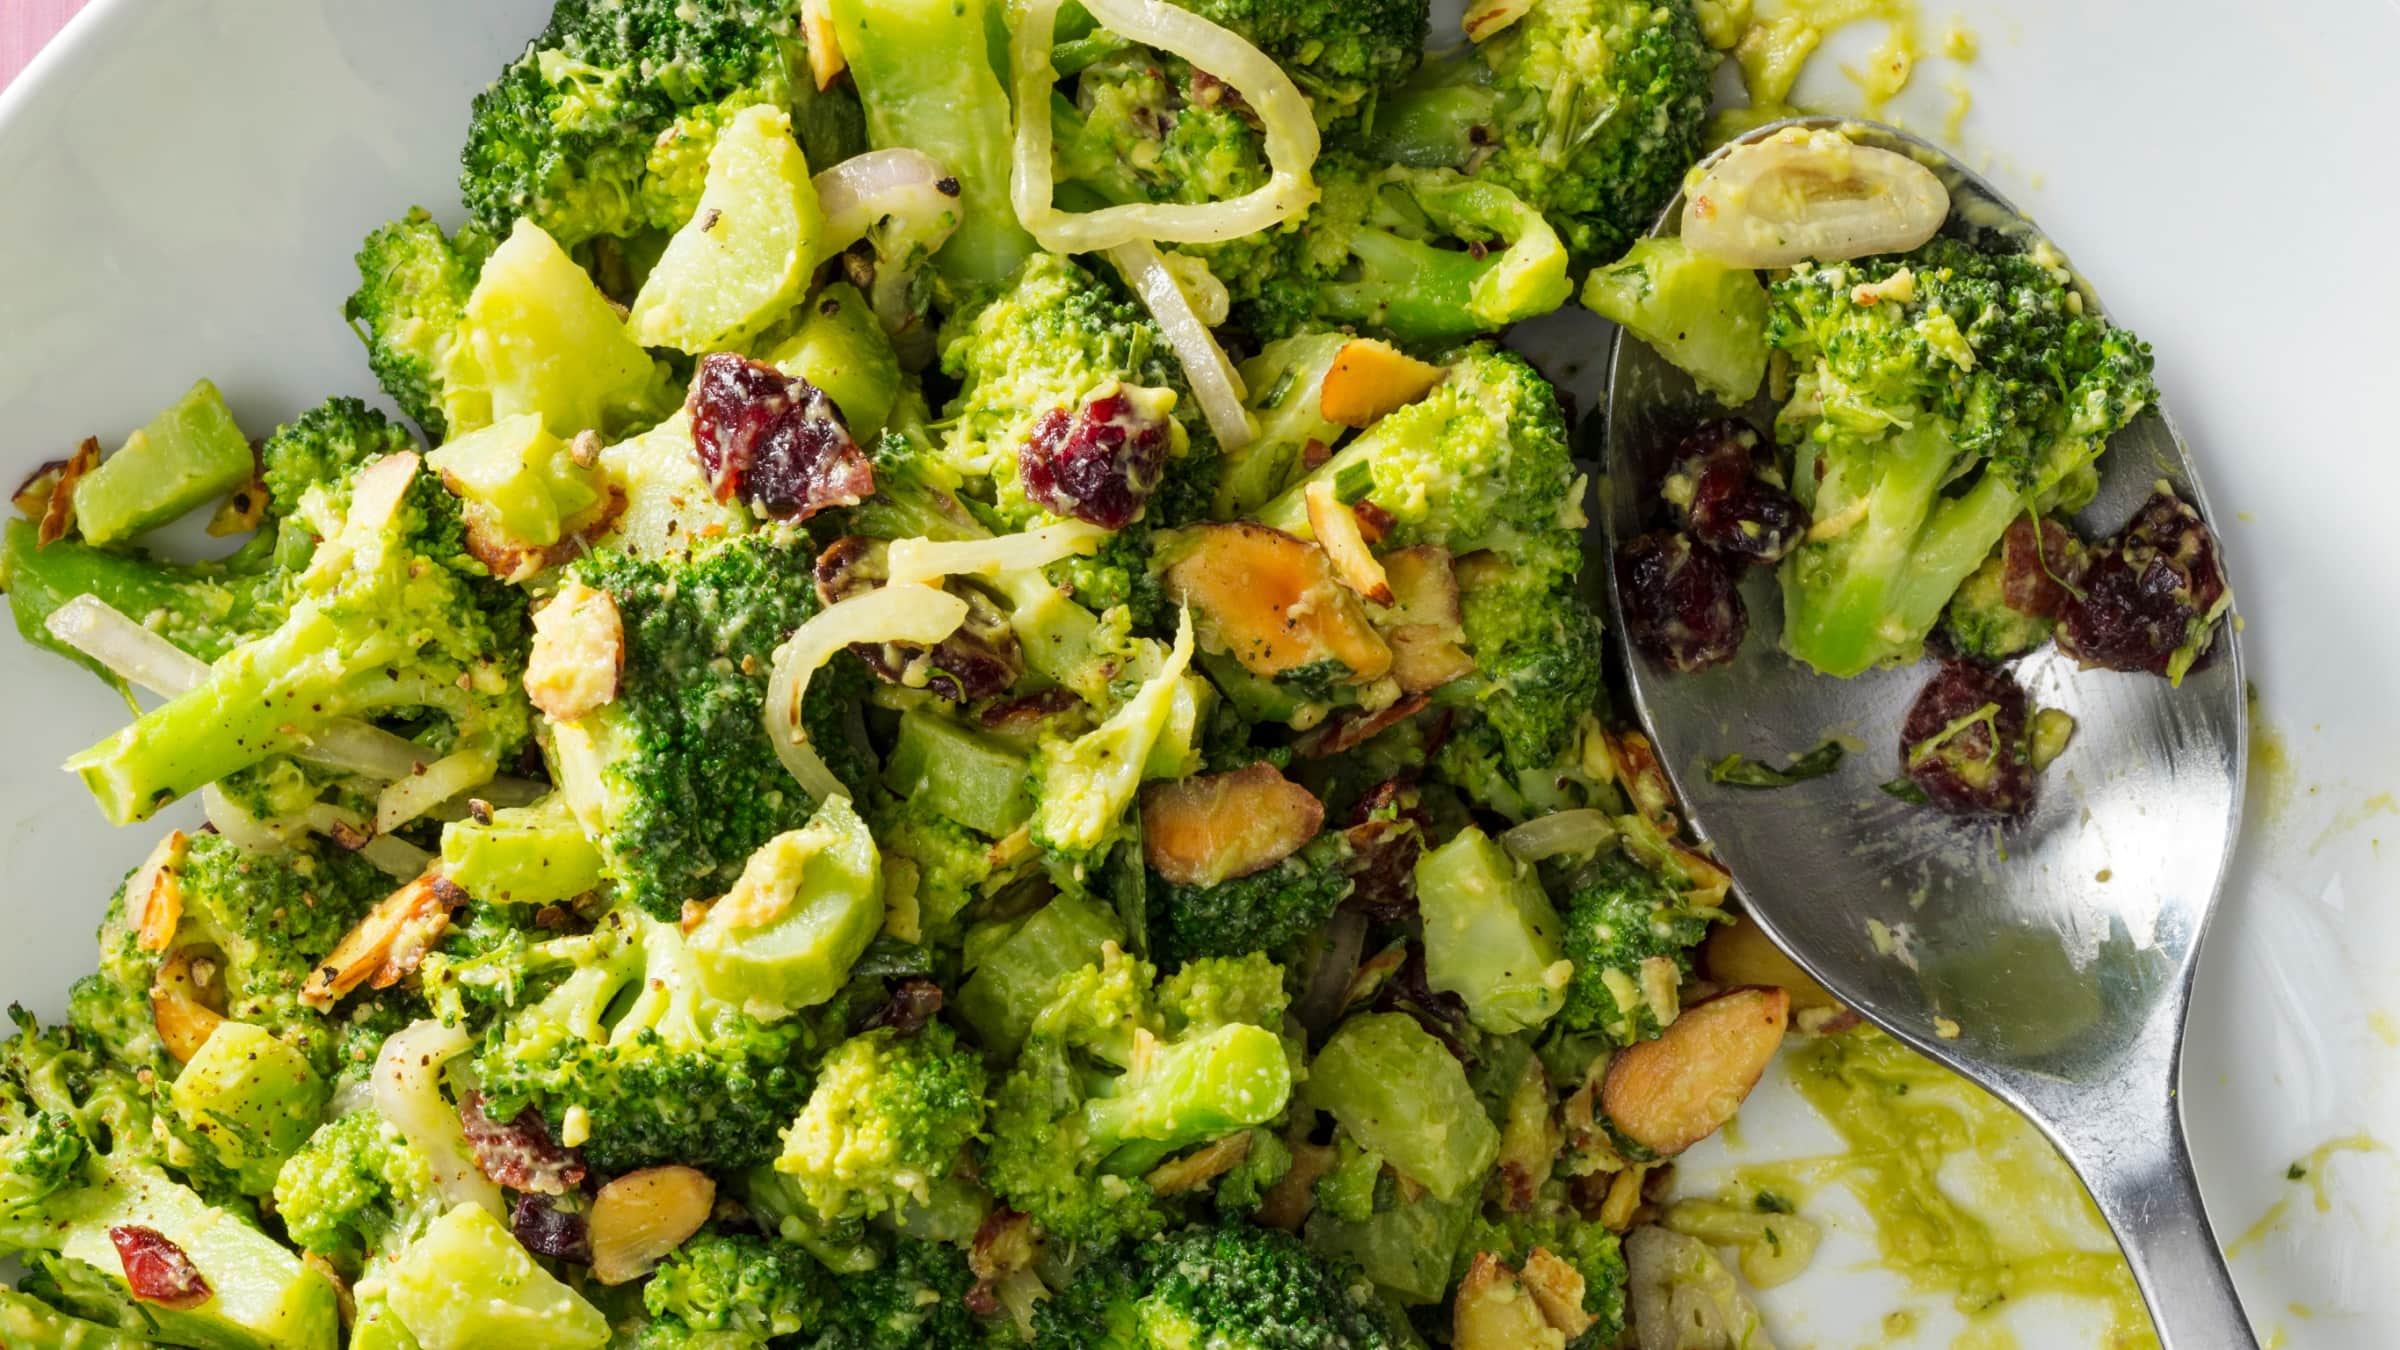 Broccoli Salad with Creamy Avocado Dressing | Cook's Illustrated